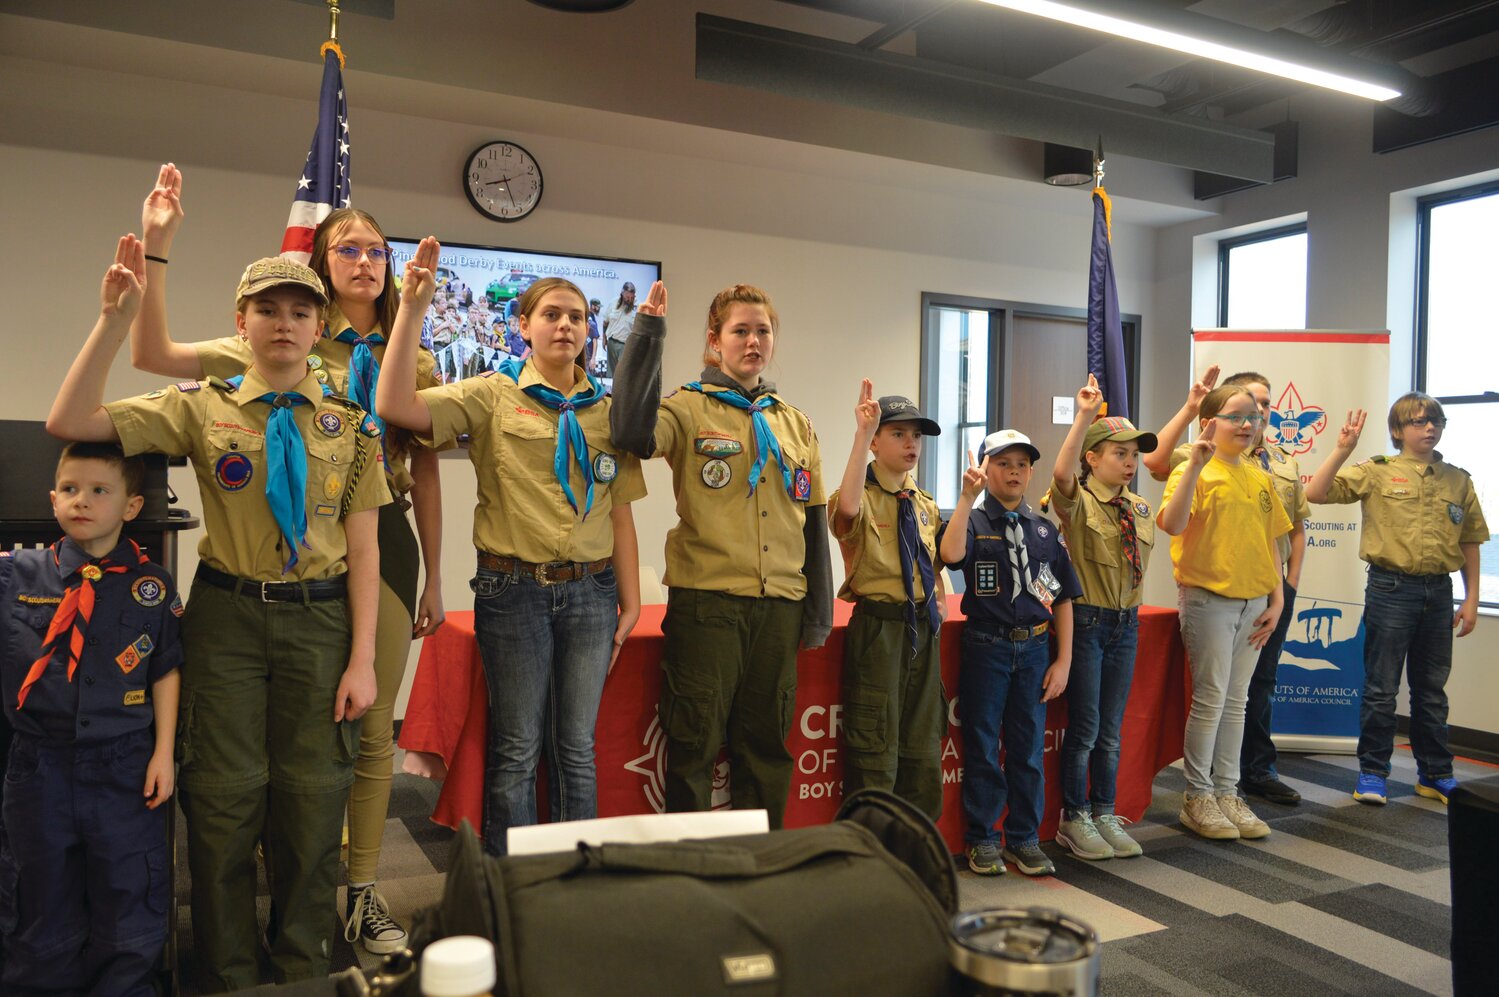 The scouts in attendance started the day by presenting the colors and reciting the scouts oath.